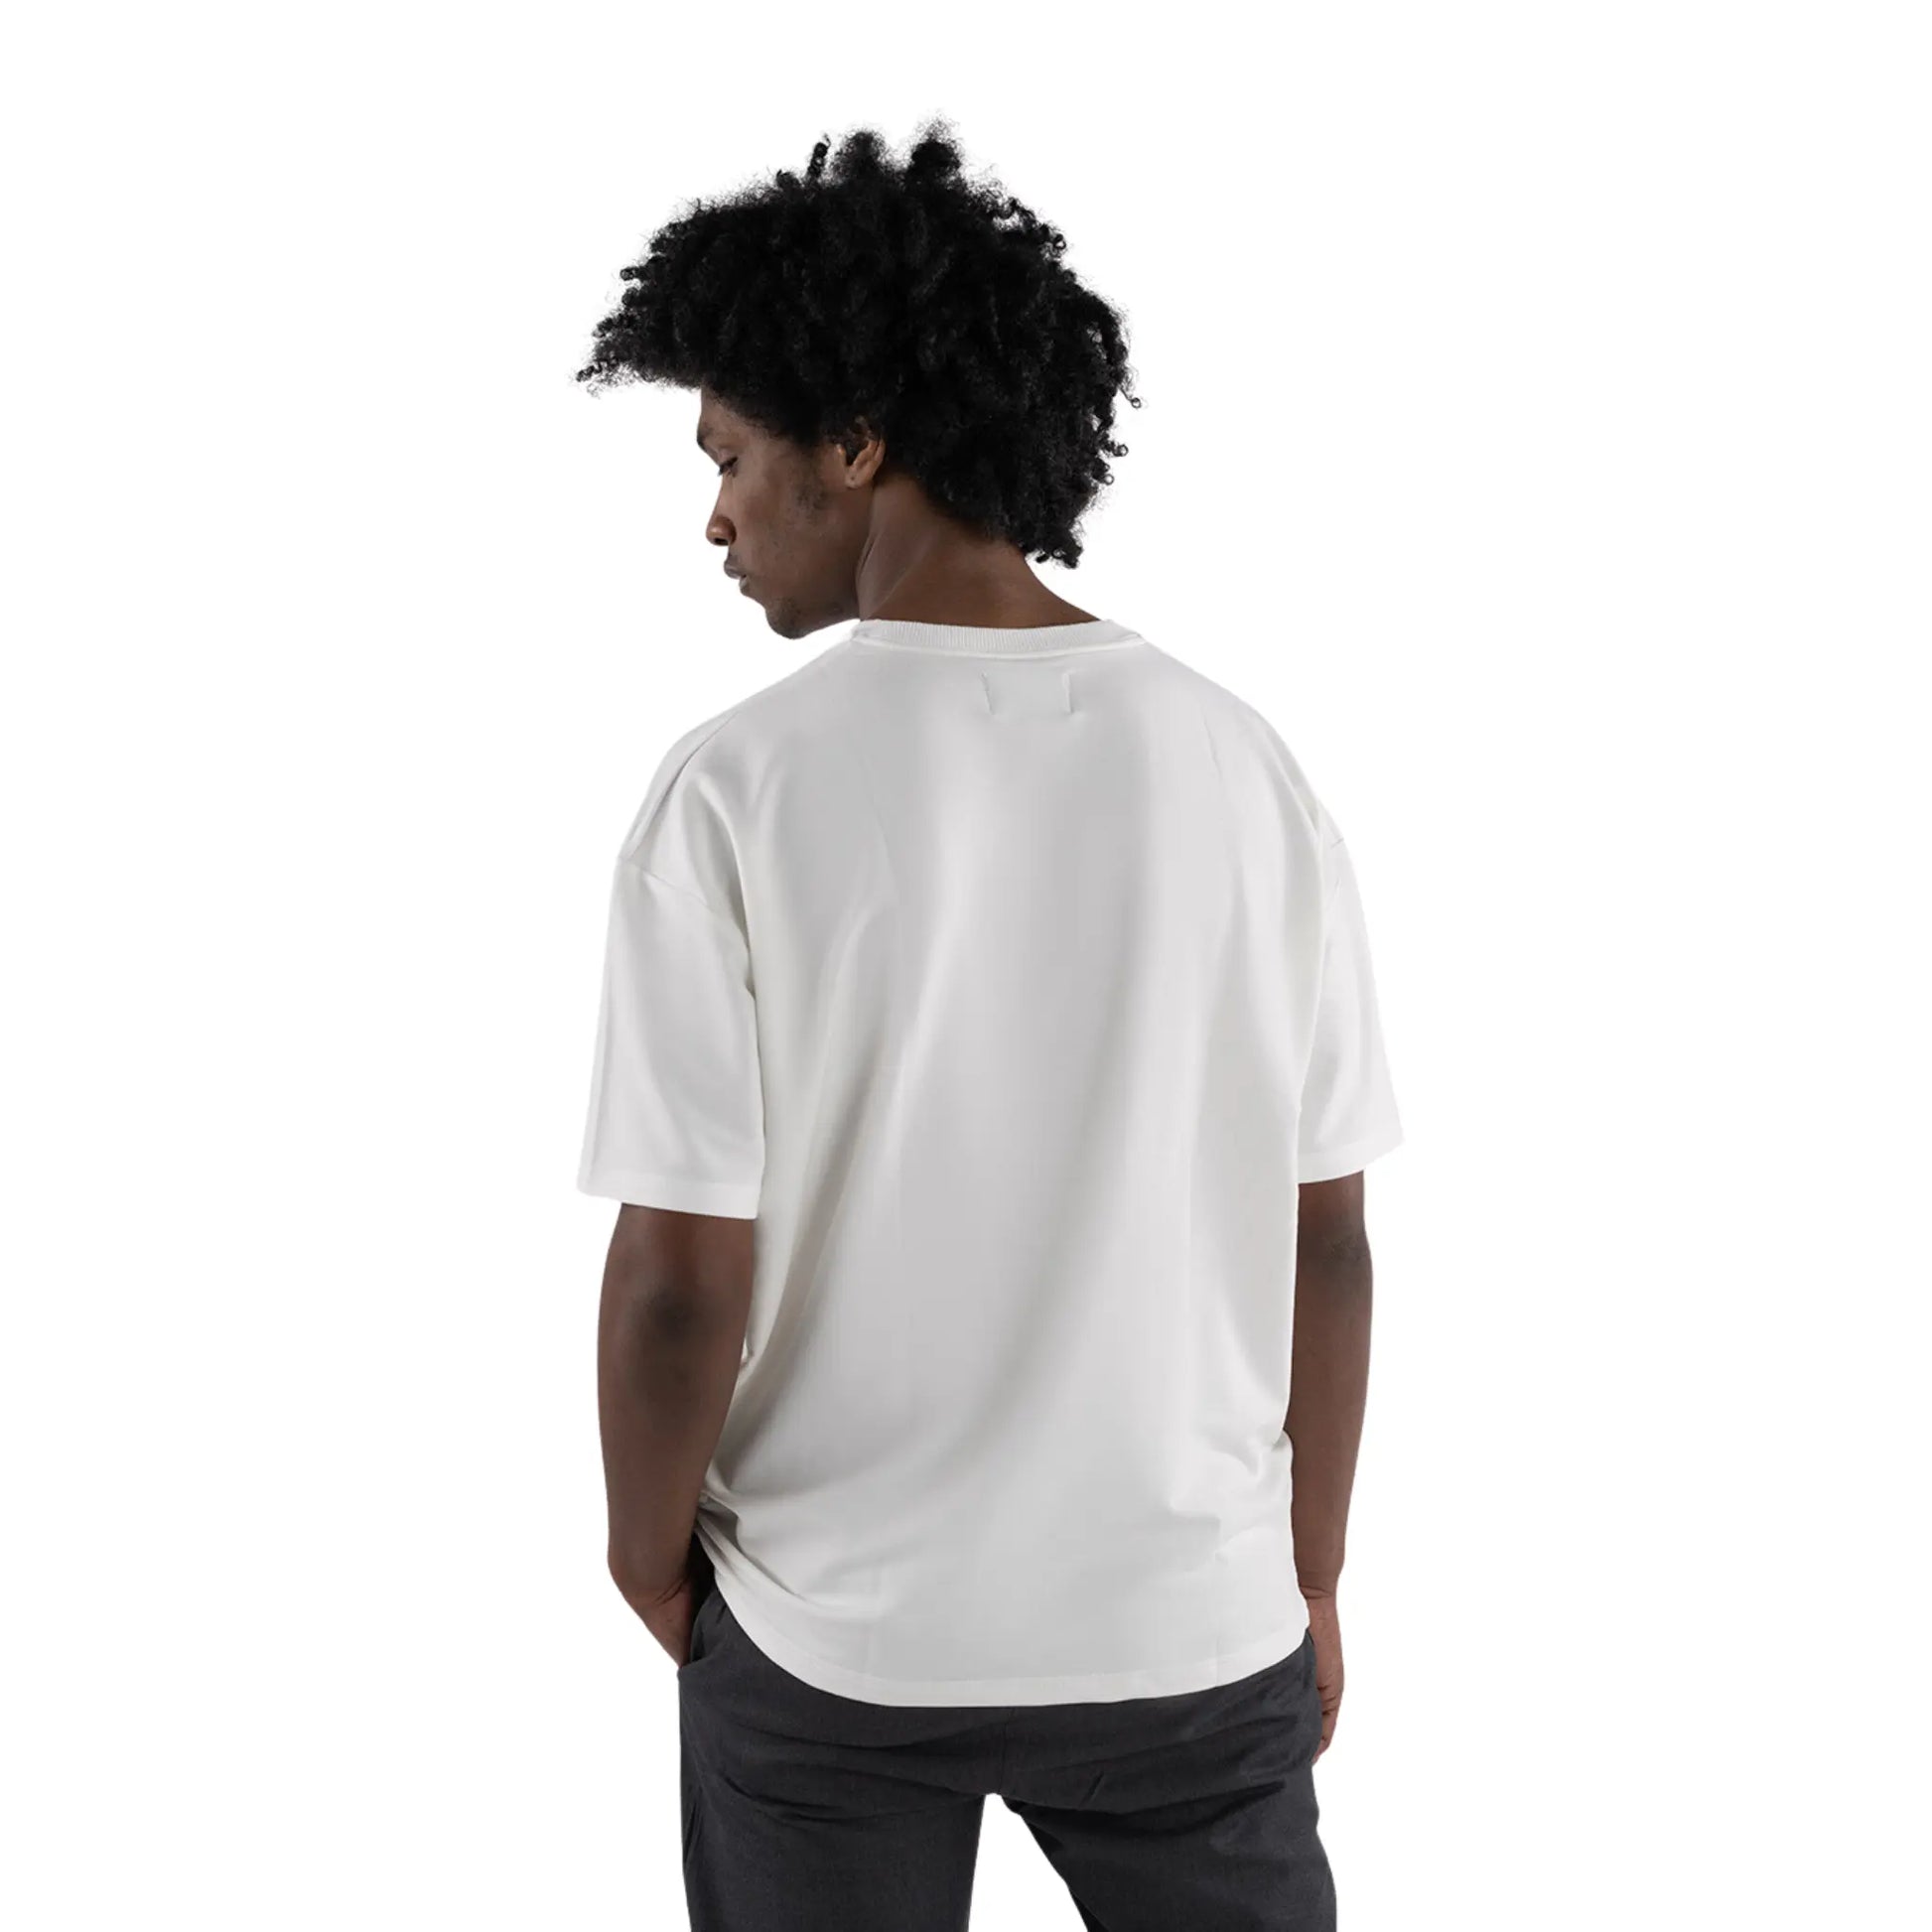 Oversized T-shirt White worn by black man back view